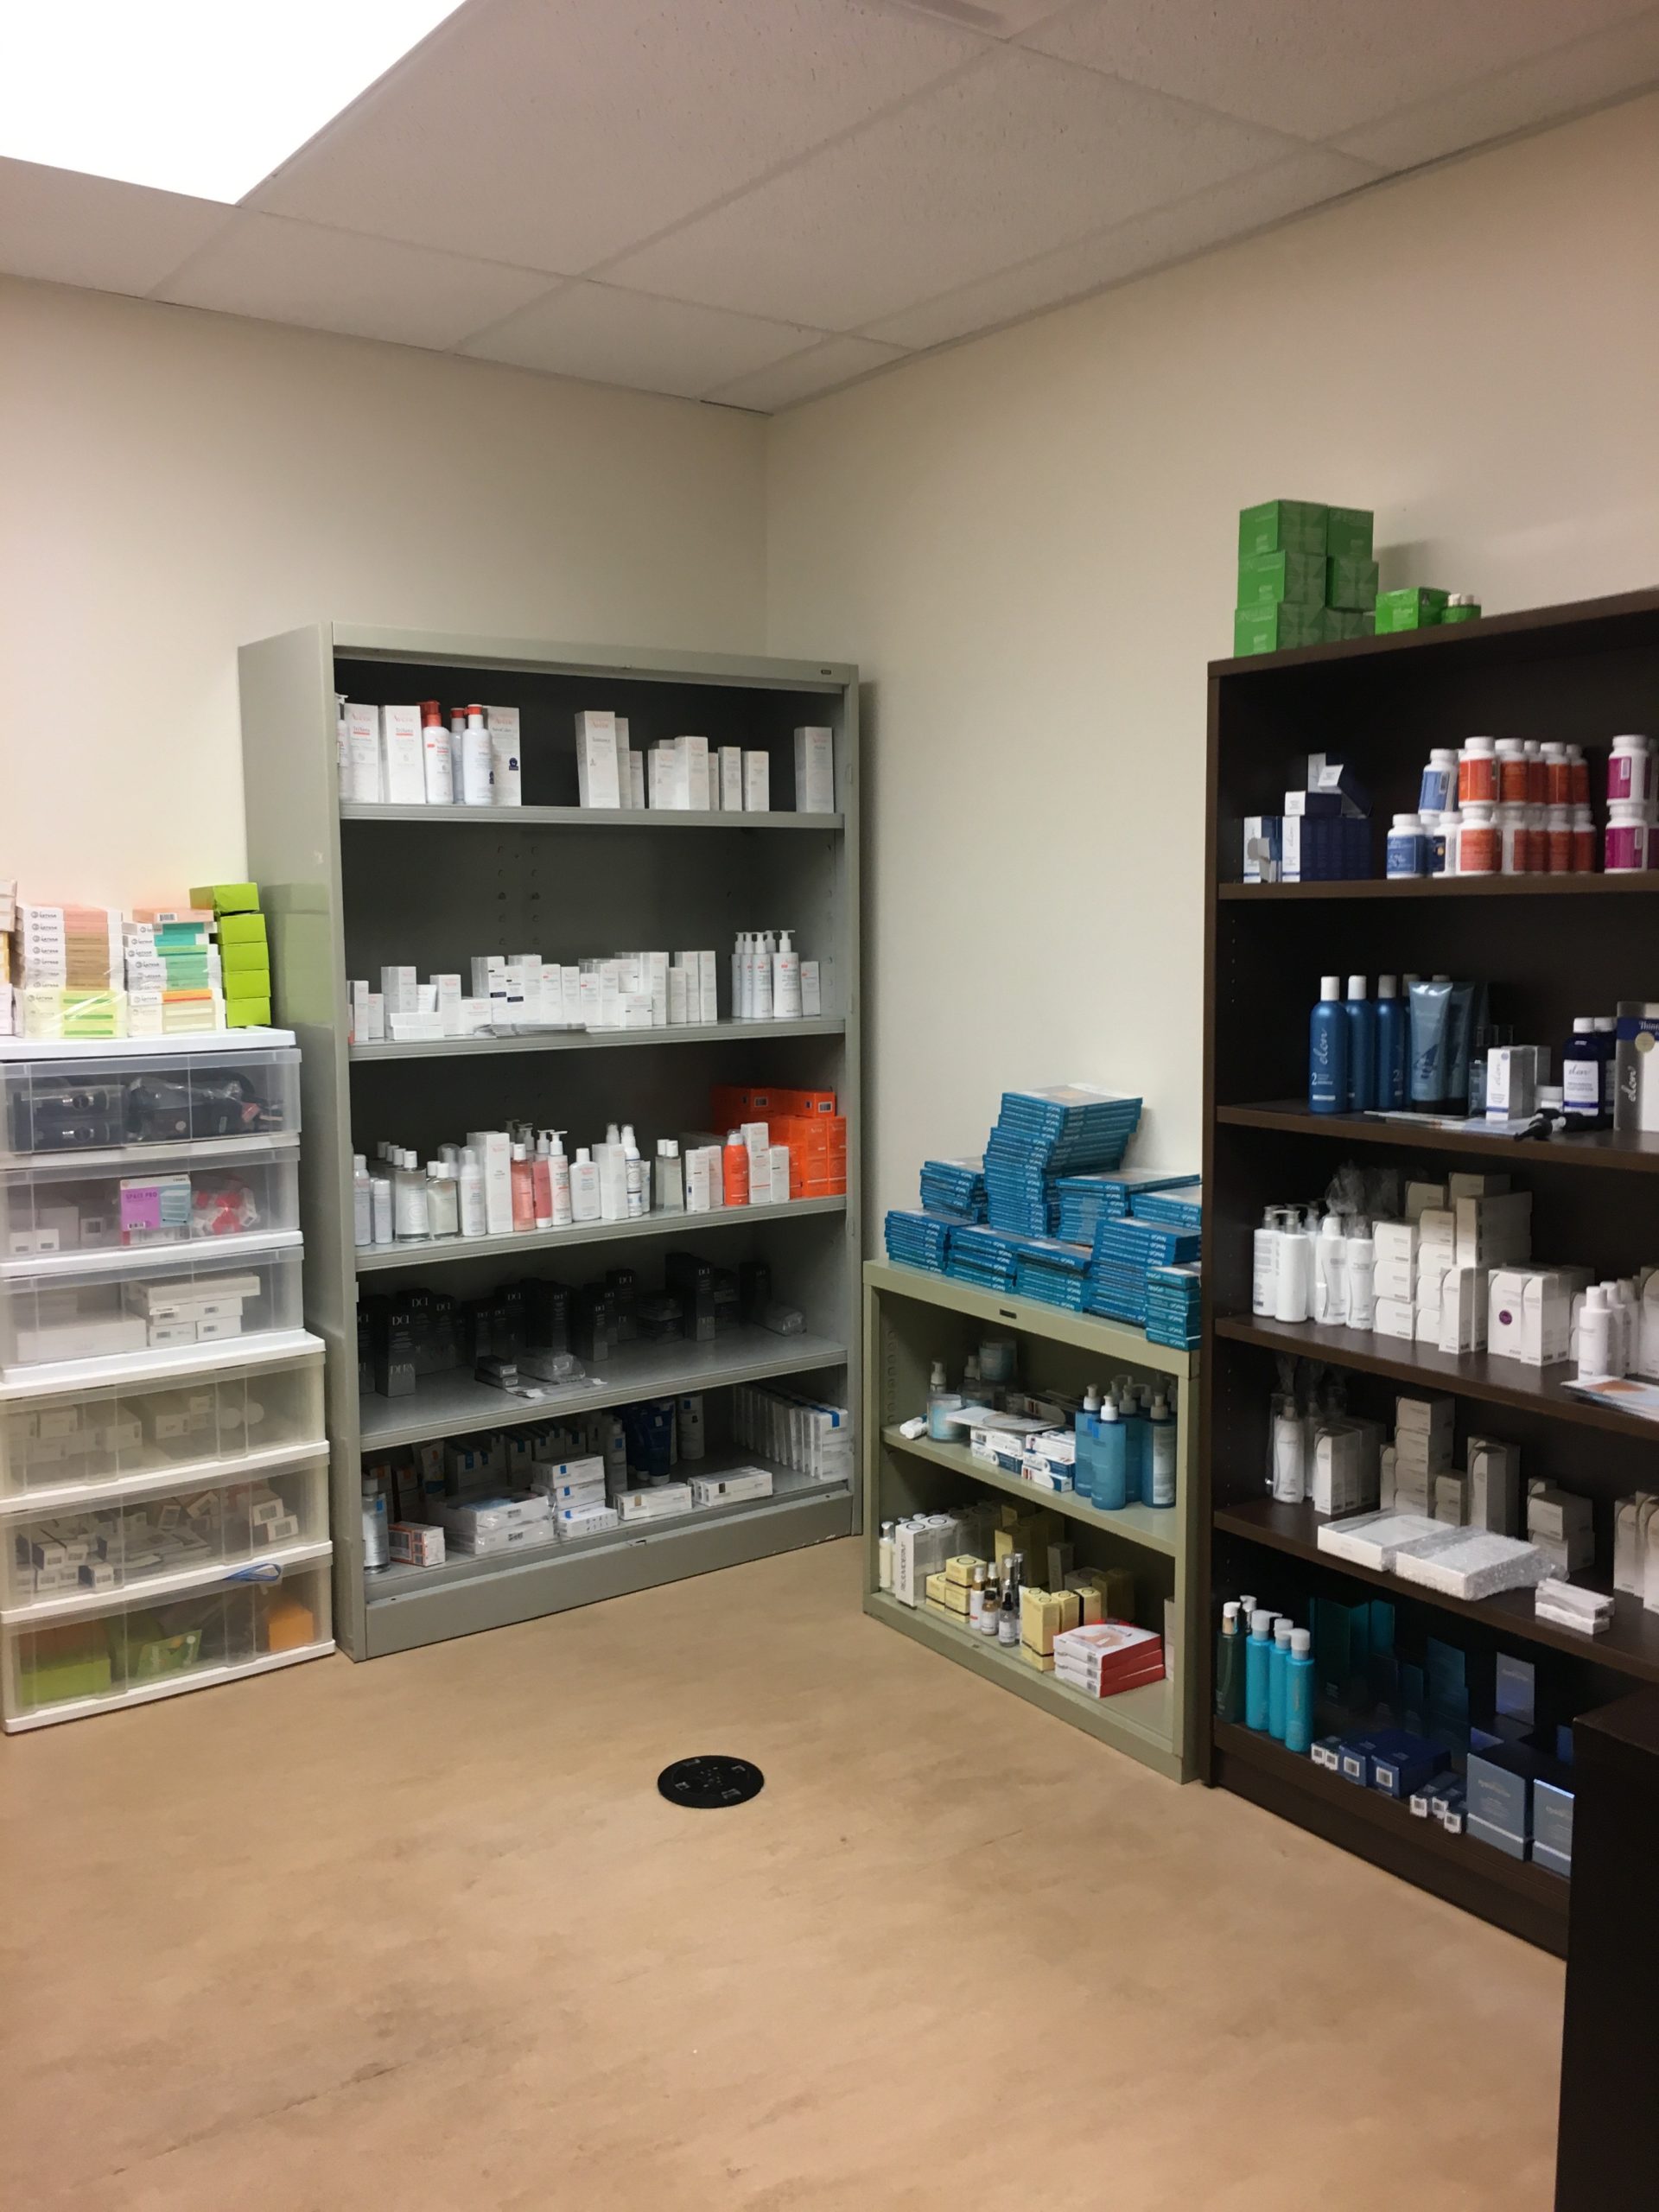 Our first inventory room at DermWarehouse